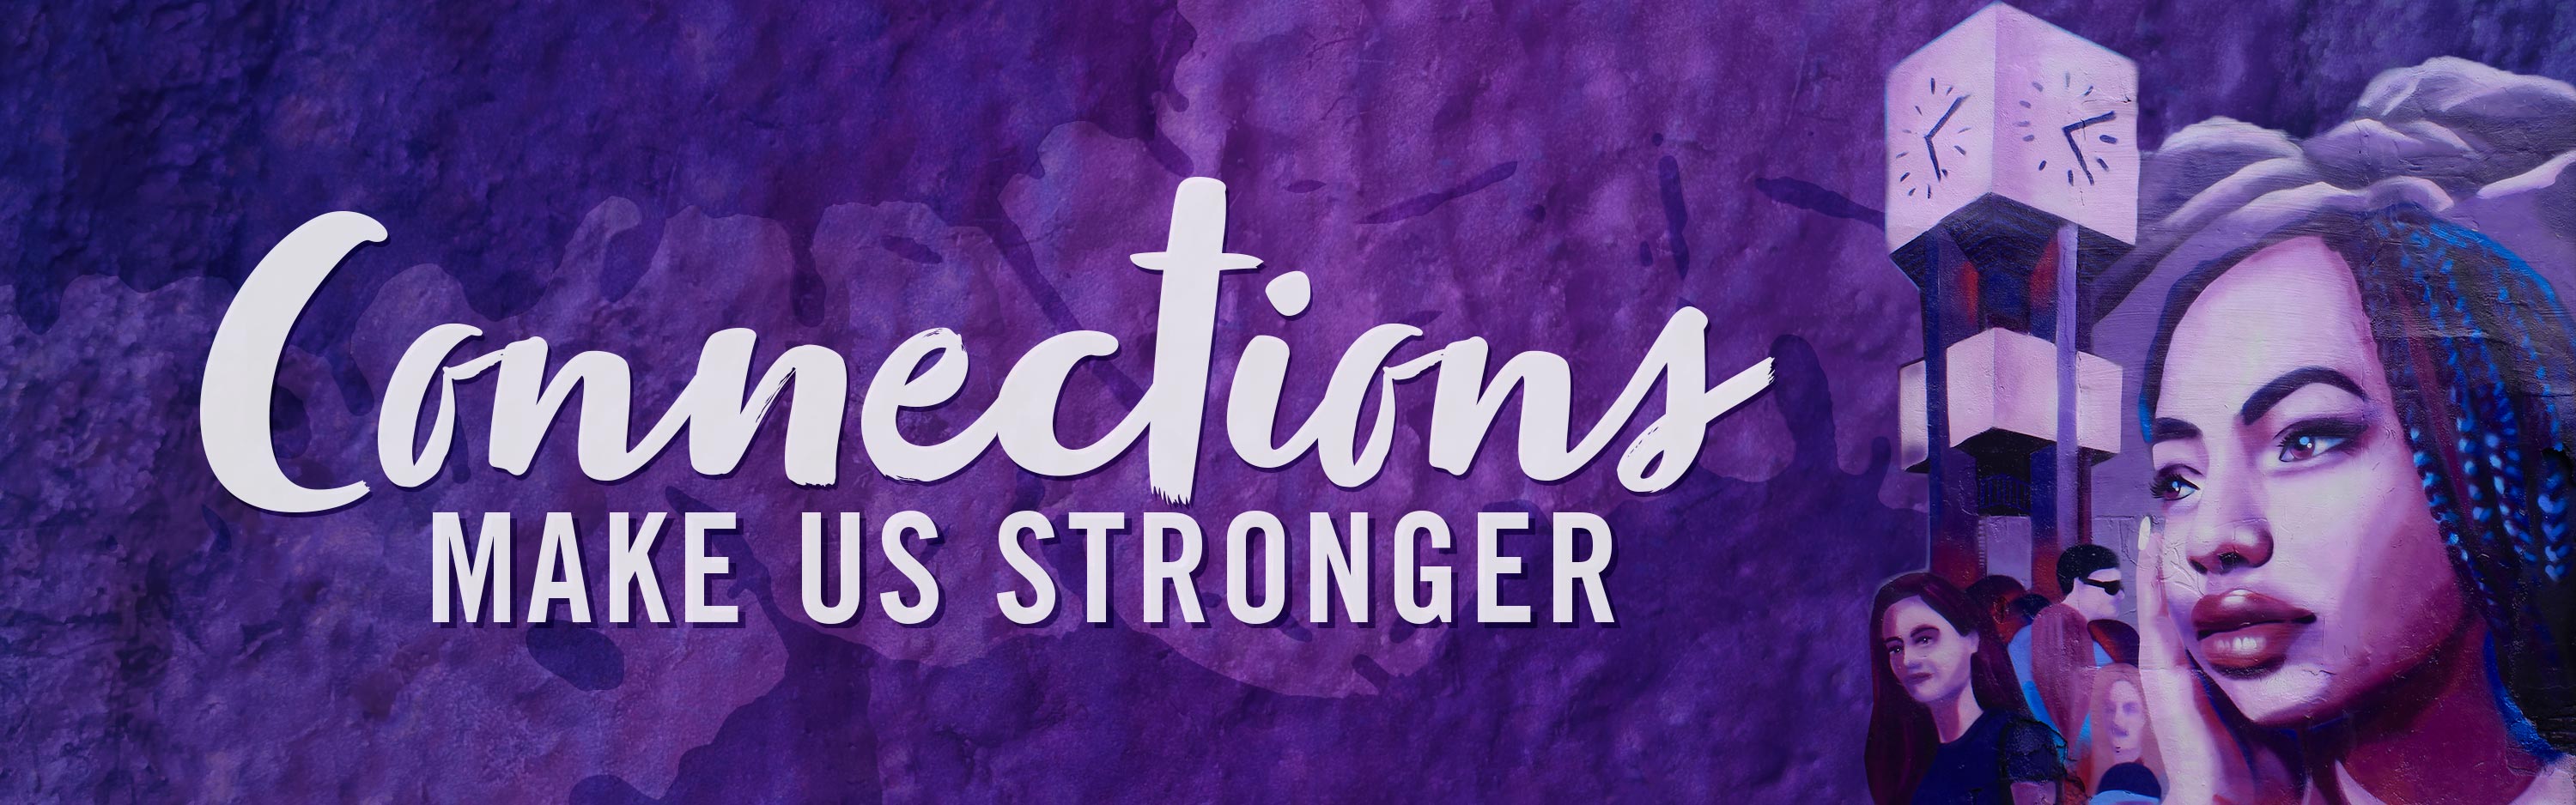 Connections Make Us Stronger banner